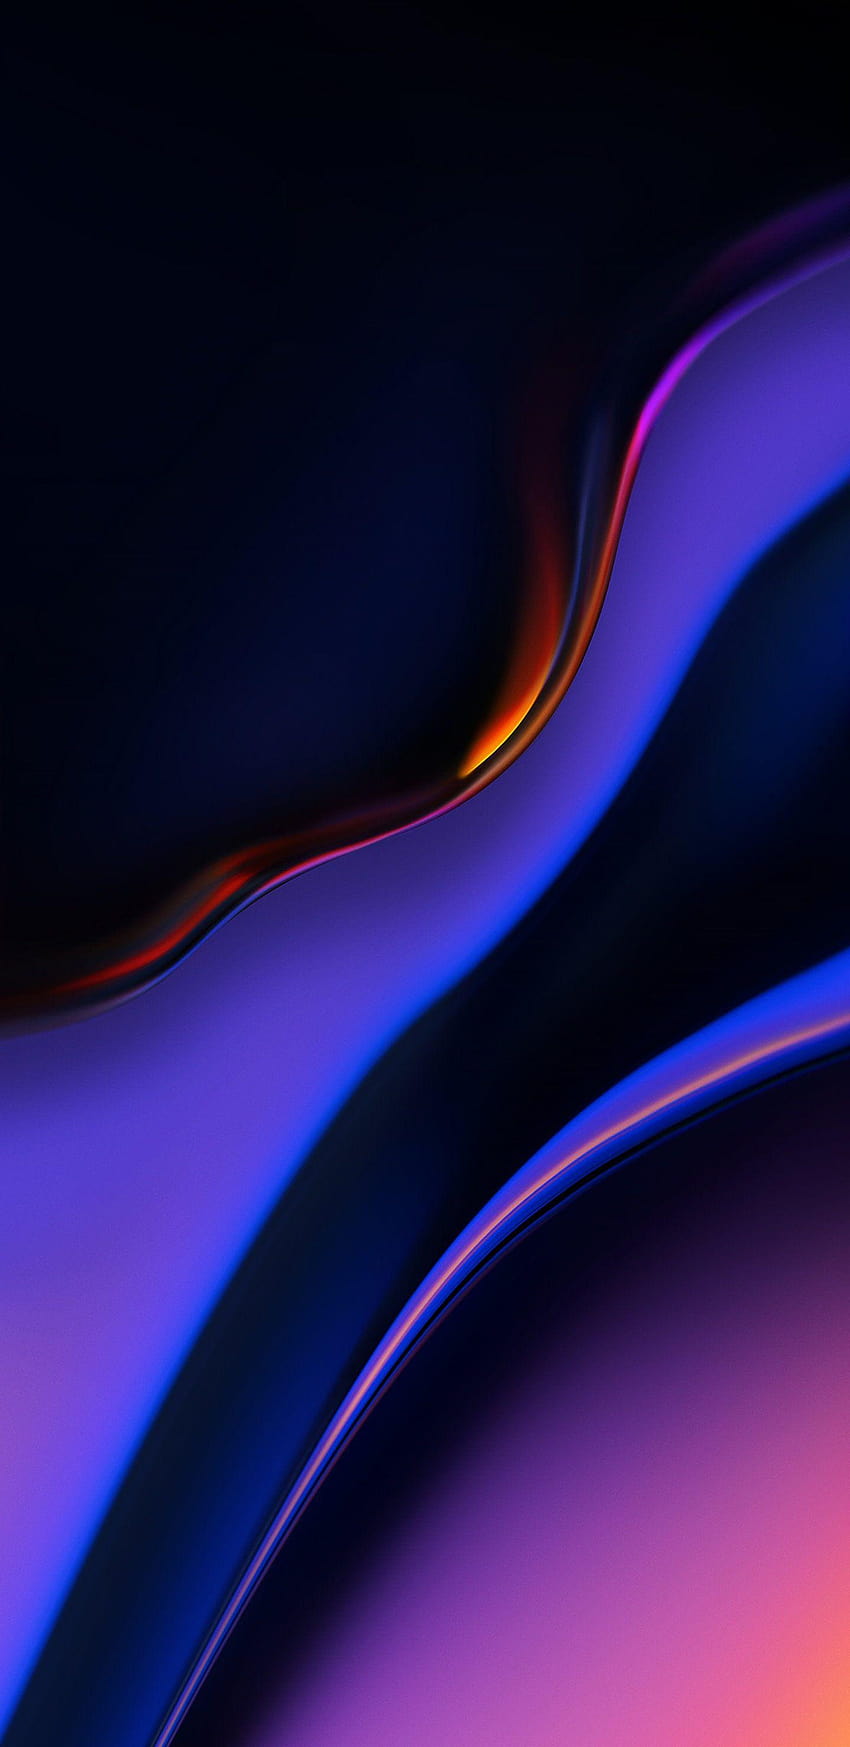 Samsung Galaxy Note 8, high contrast android HD phone wallpaper